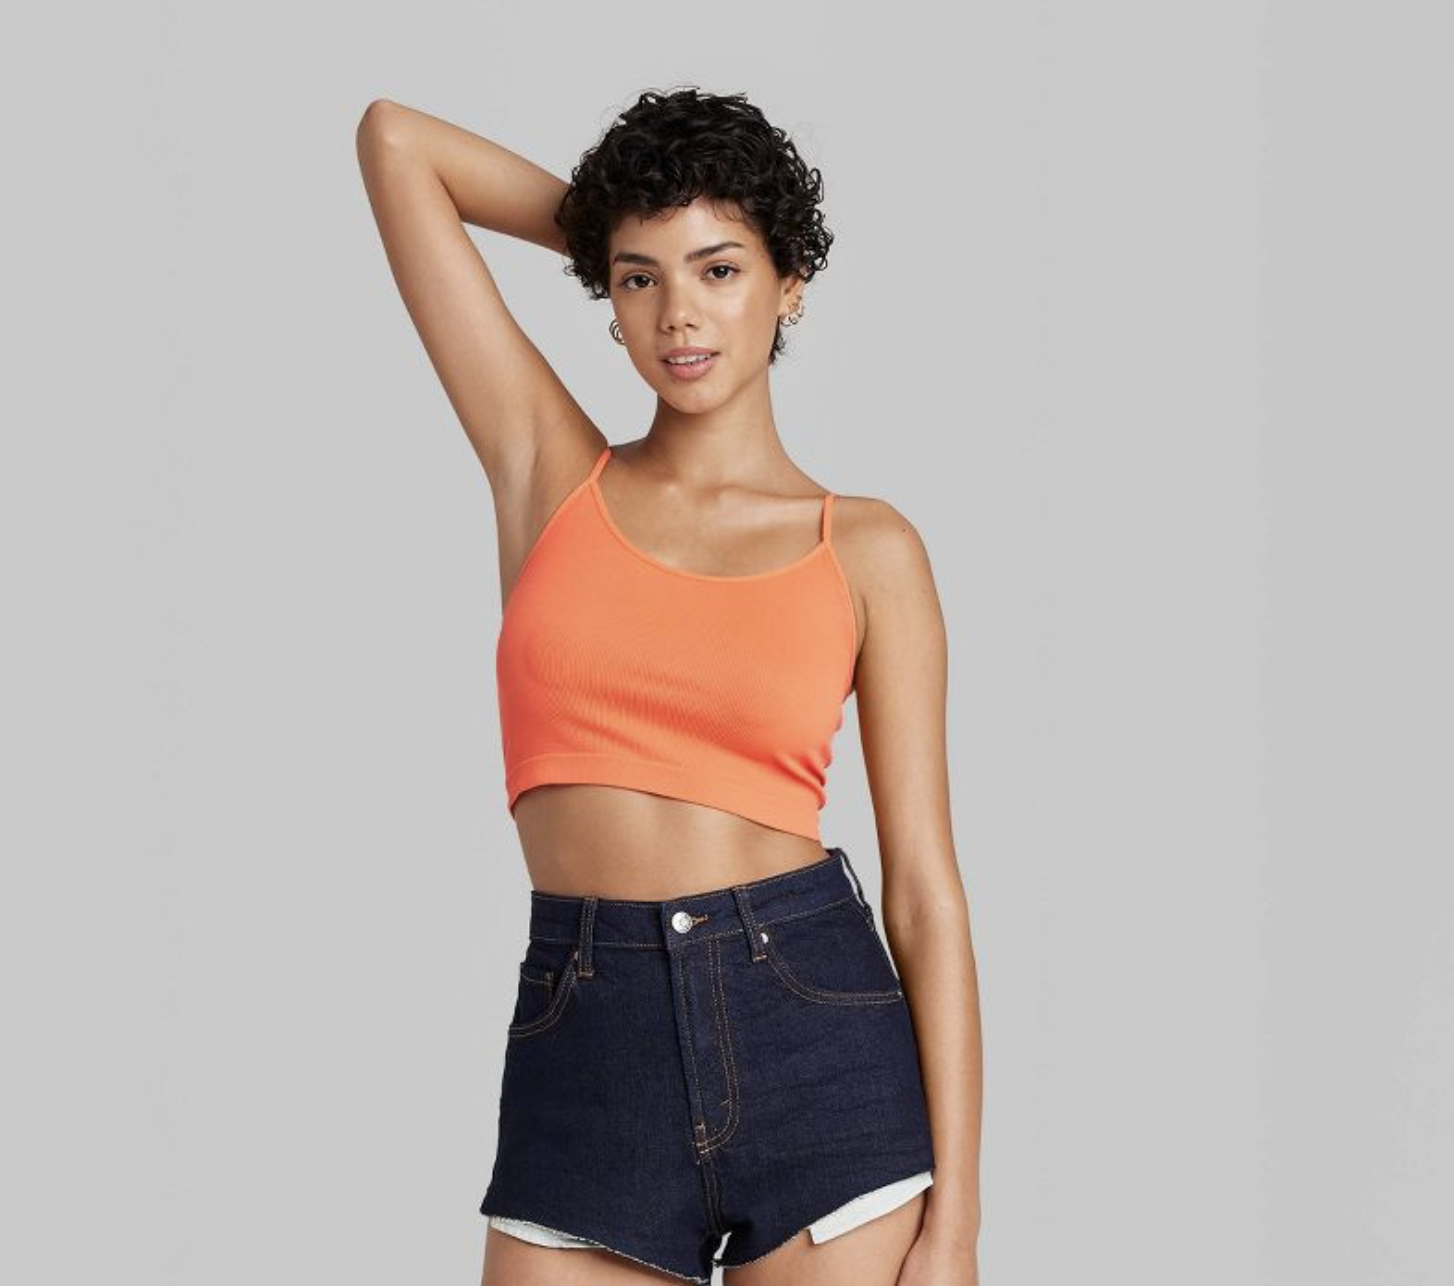 A person with curly brown hair wearing the bralette in orange